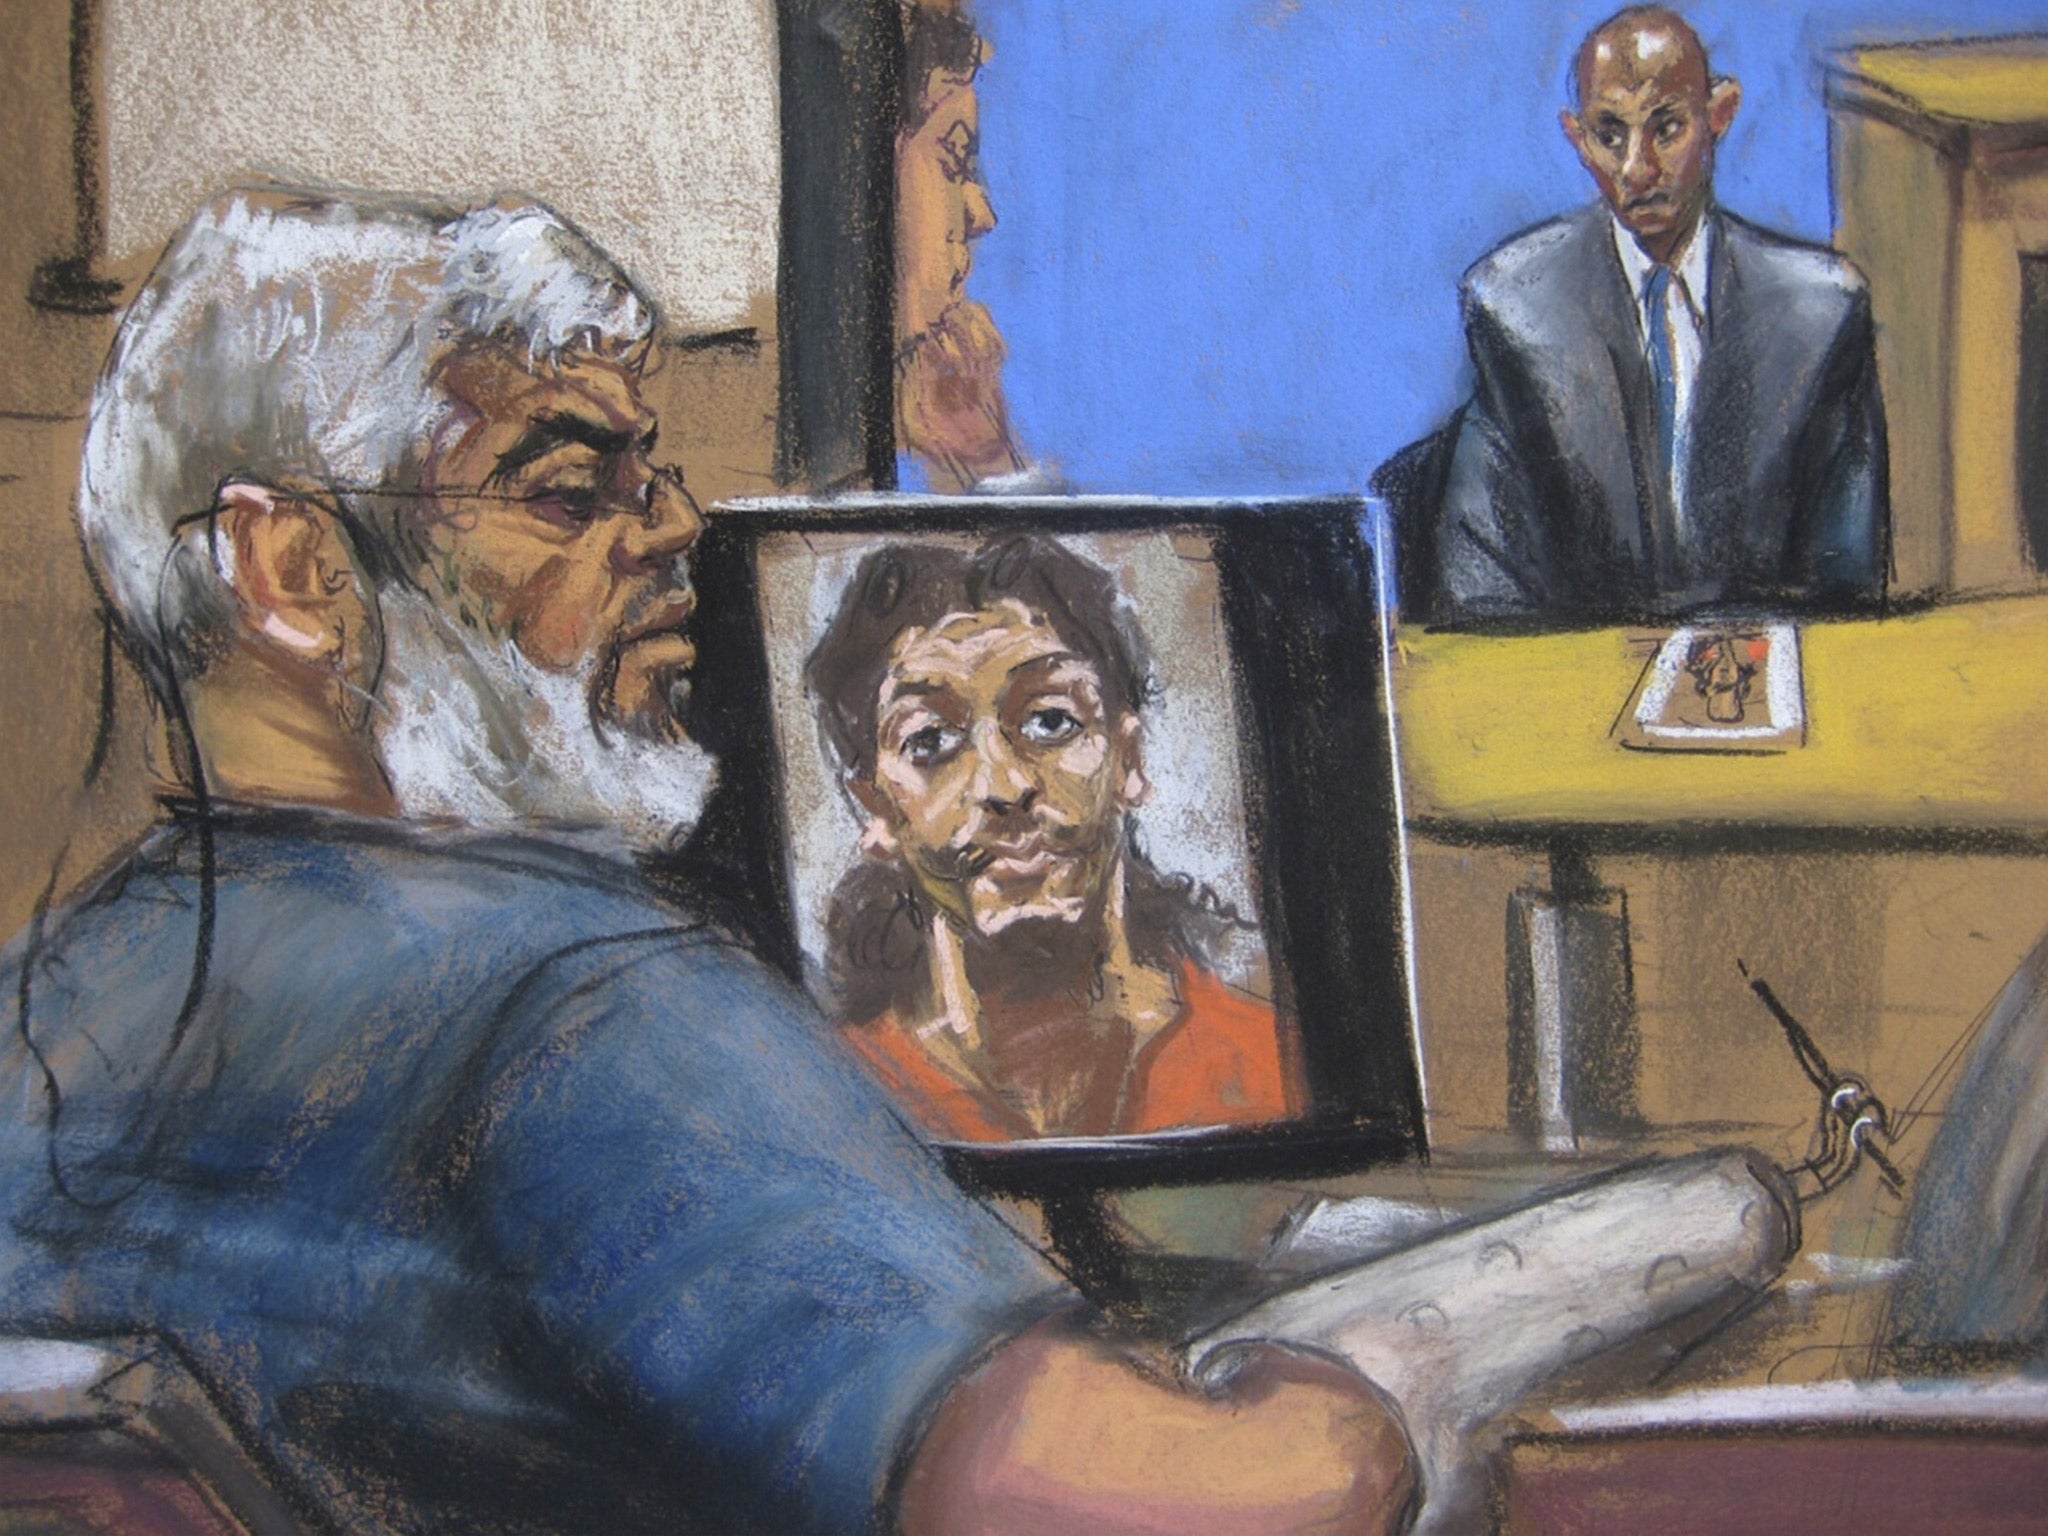 Abu Hamza during his trial in New York